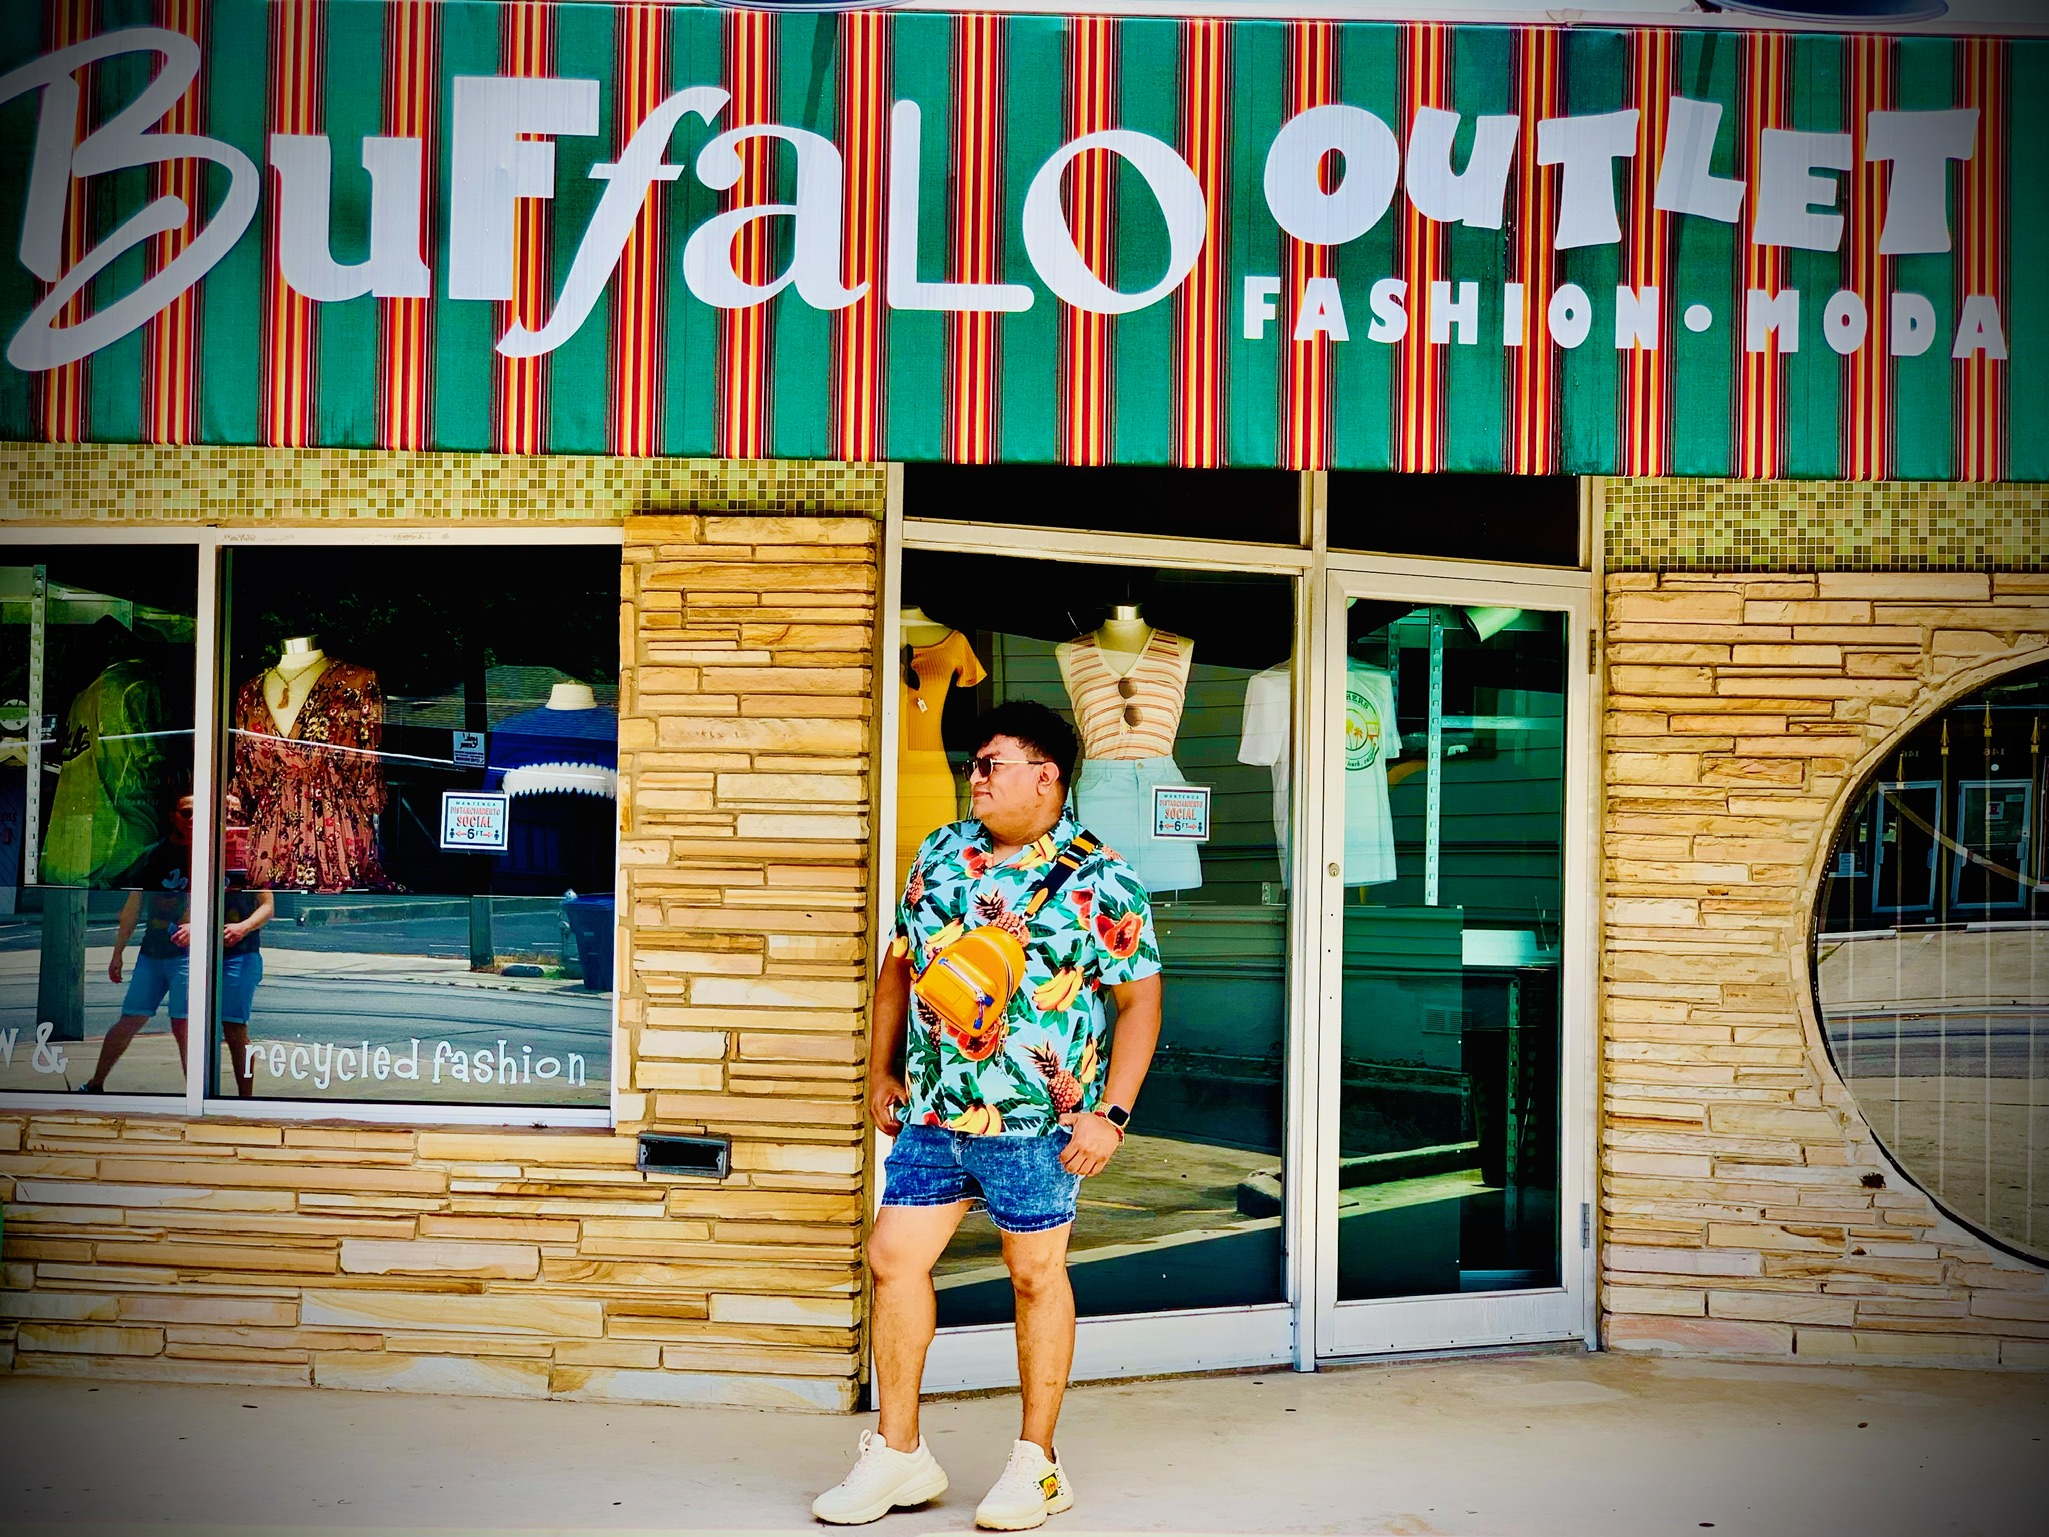 Felix in Hawaiian shirt, jean shorts and yellow crossbody bag in front of Buffalo Outlet store